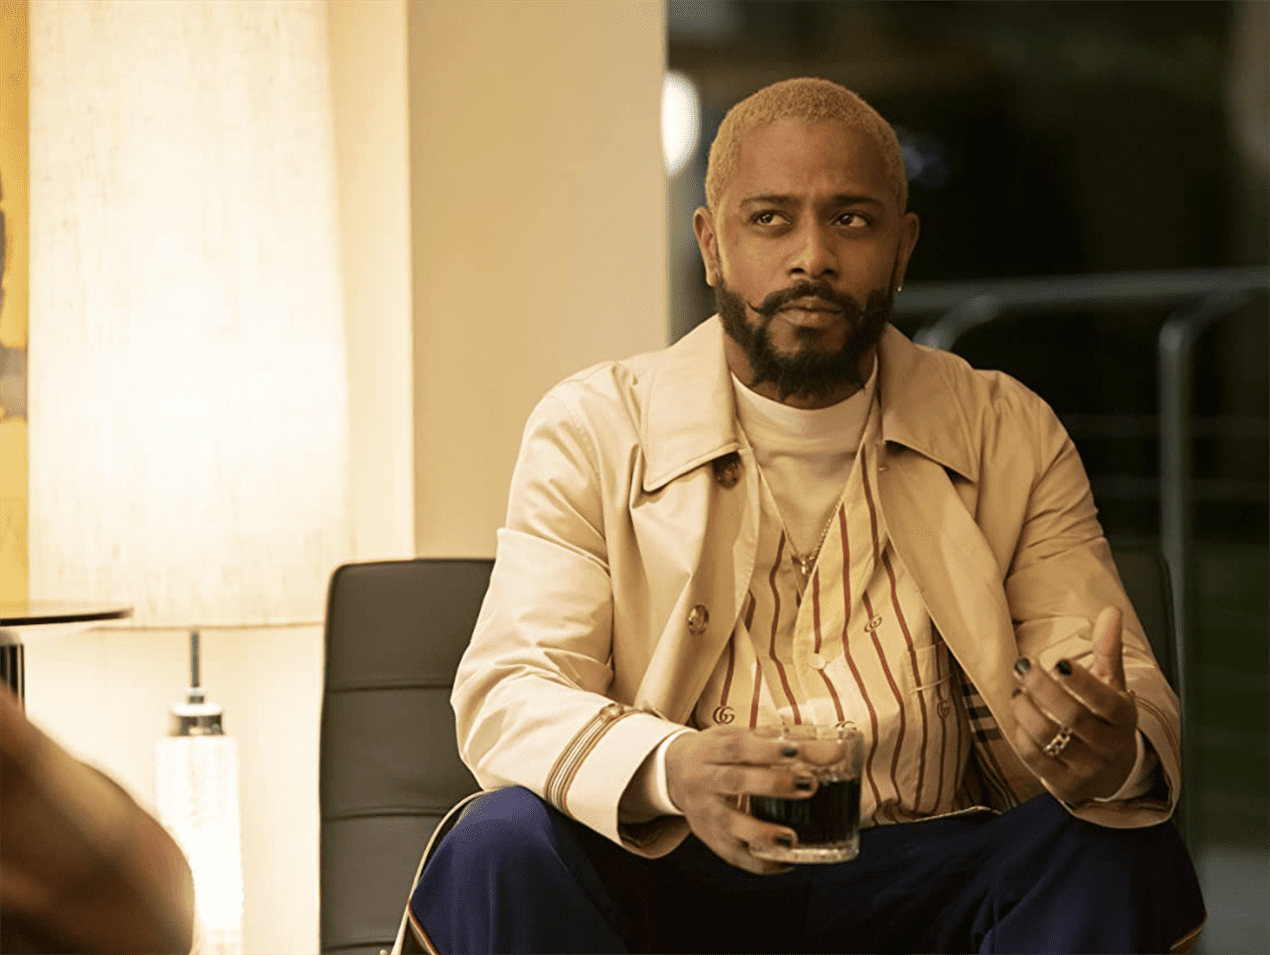 Darius (LaKeith Stanfield) meets MK, an Asian woman who thinks he is flirting with her. Photo courtesy of FX